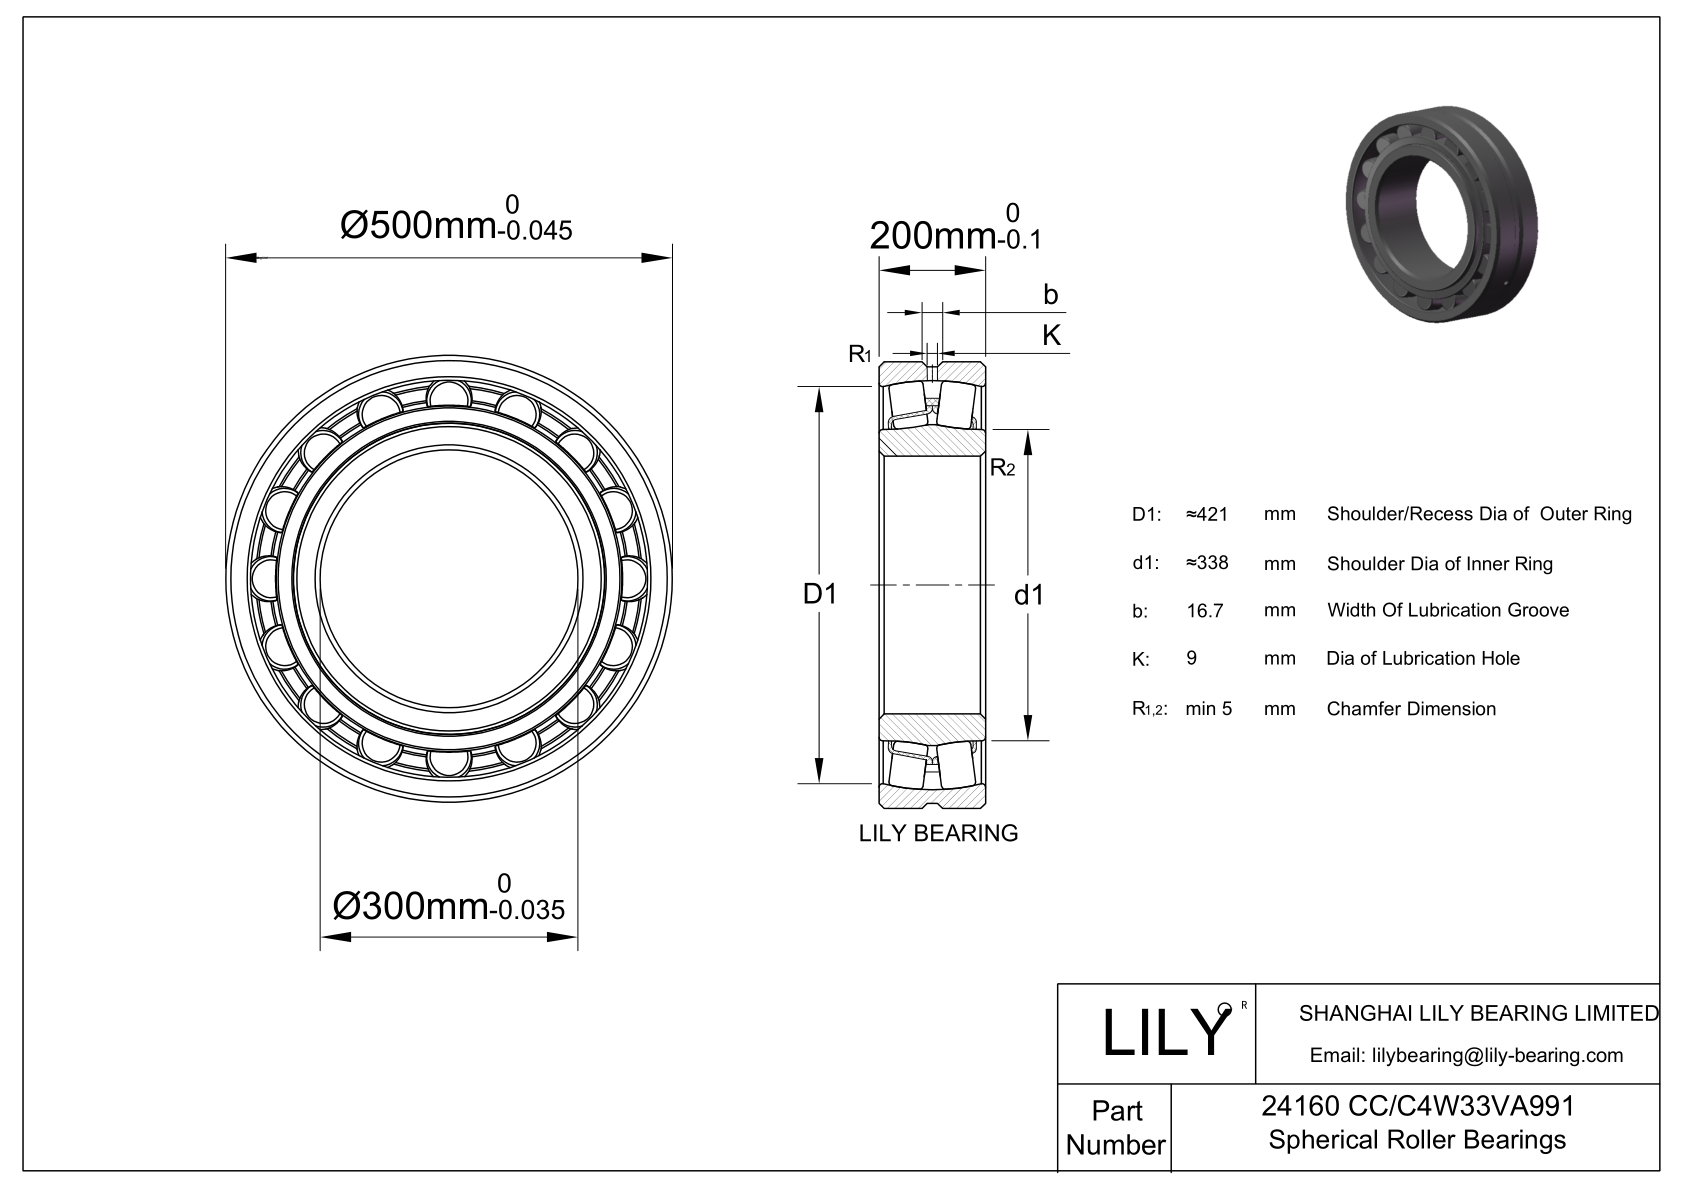 24160 CC/C4W33VA991 Double Row Spherical Roller Bearing cad drawing